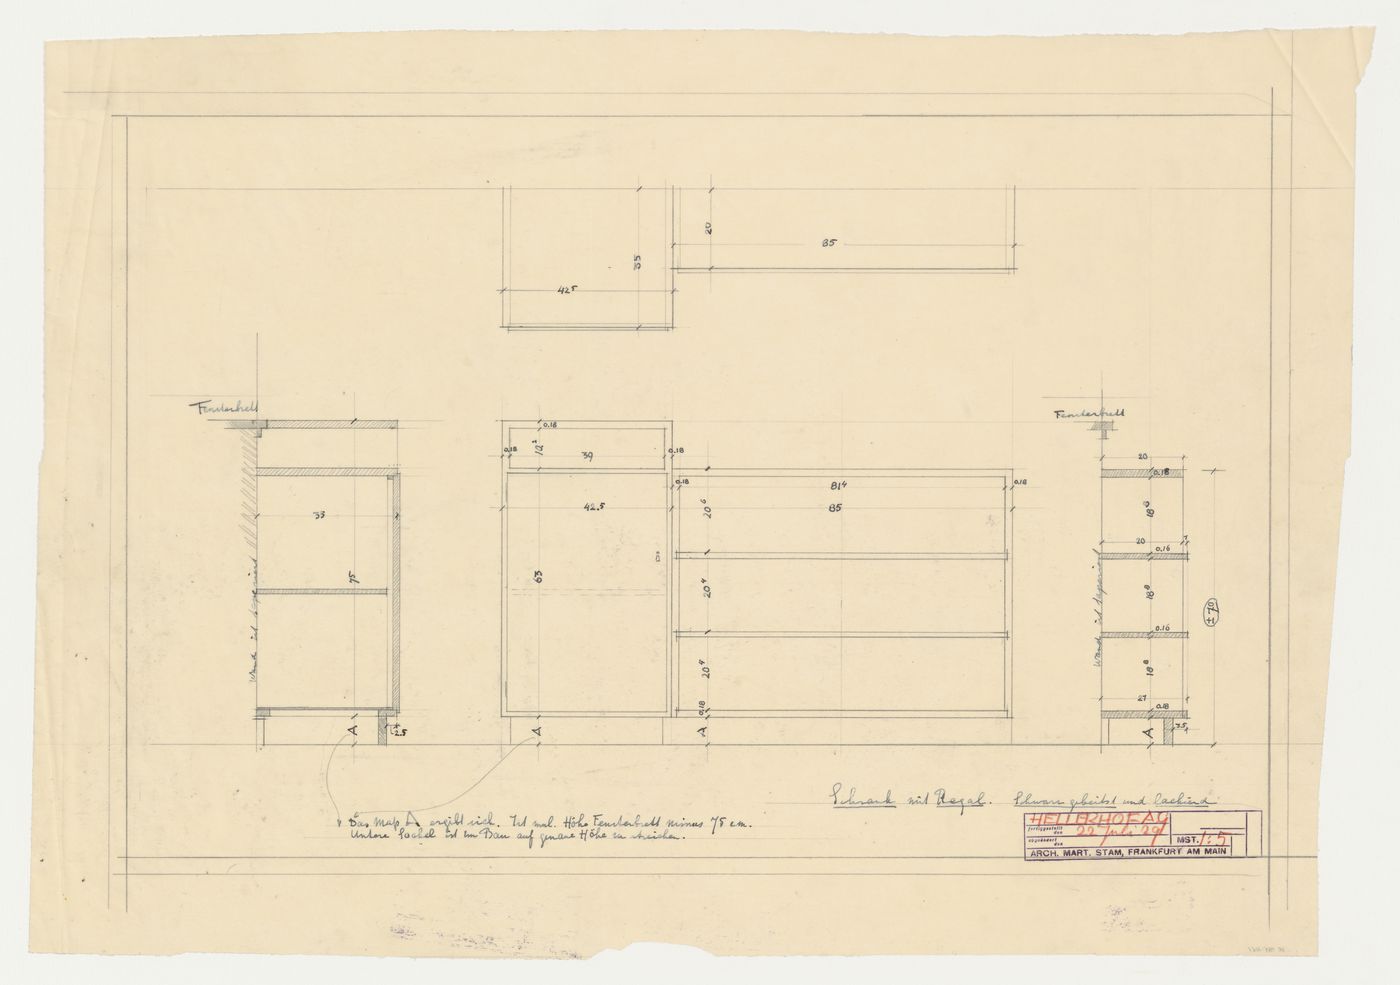 Plan, sections, and elevation for a cupboard with shelves for Hellerhof Housing Estate, Frankfurt am Main, Germany